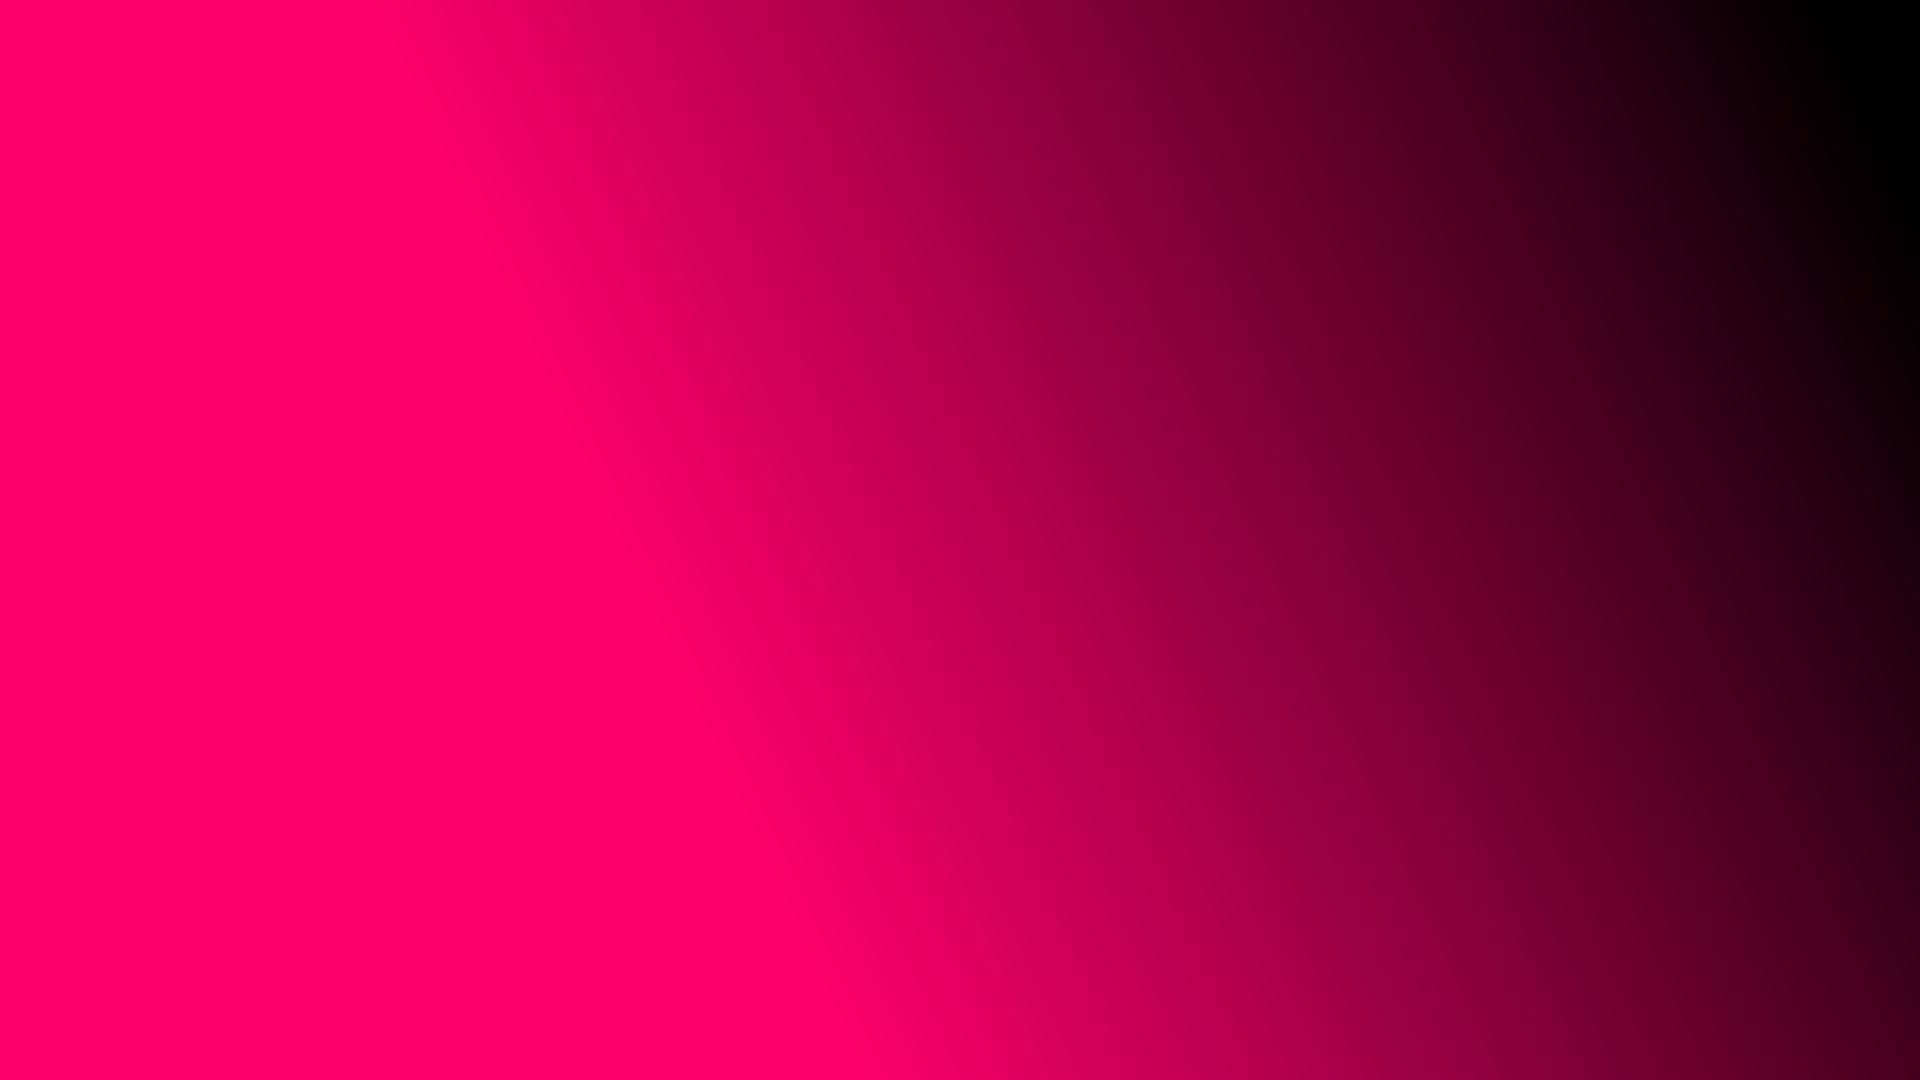 Black And Pink Aesthetic Linear Gradient Background